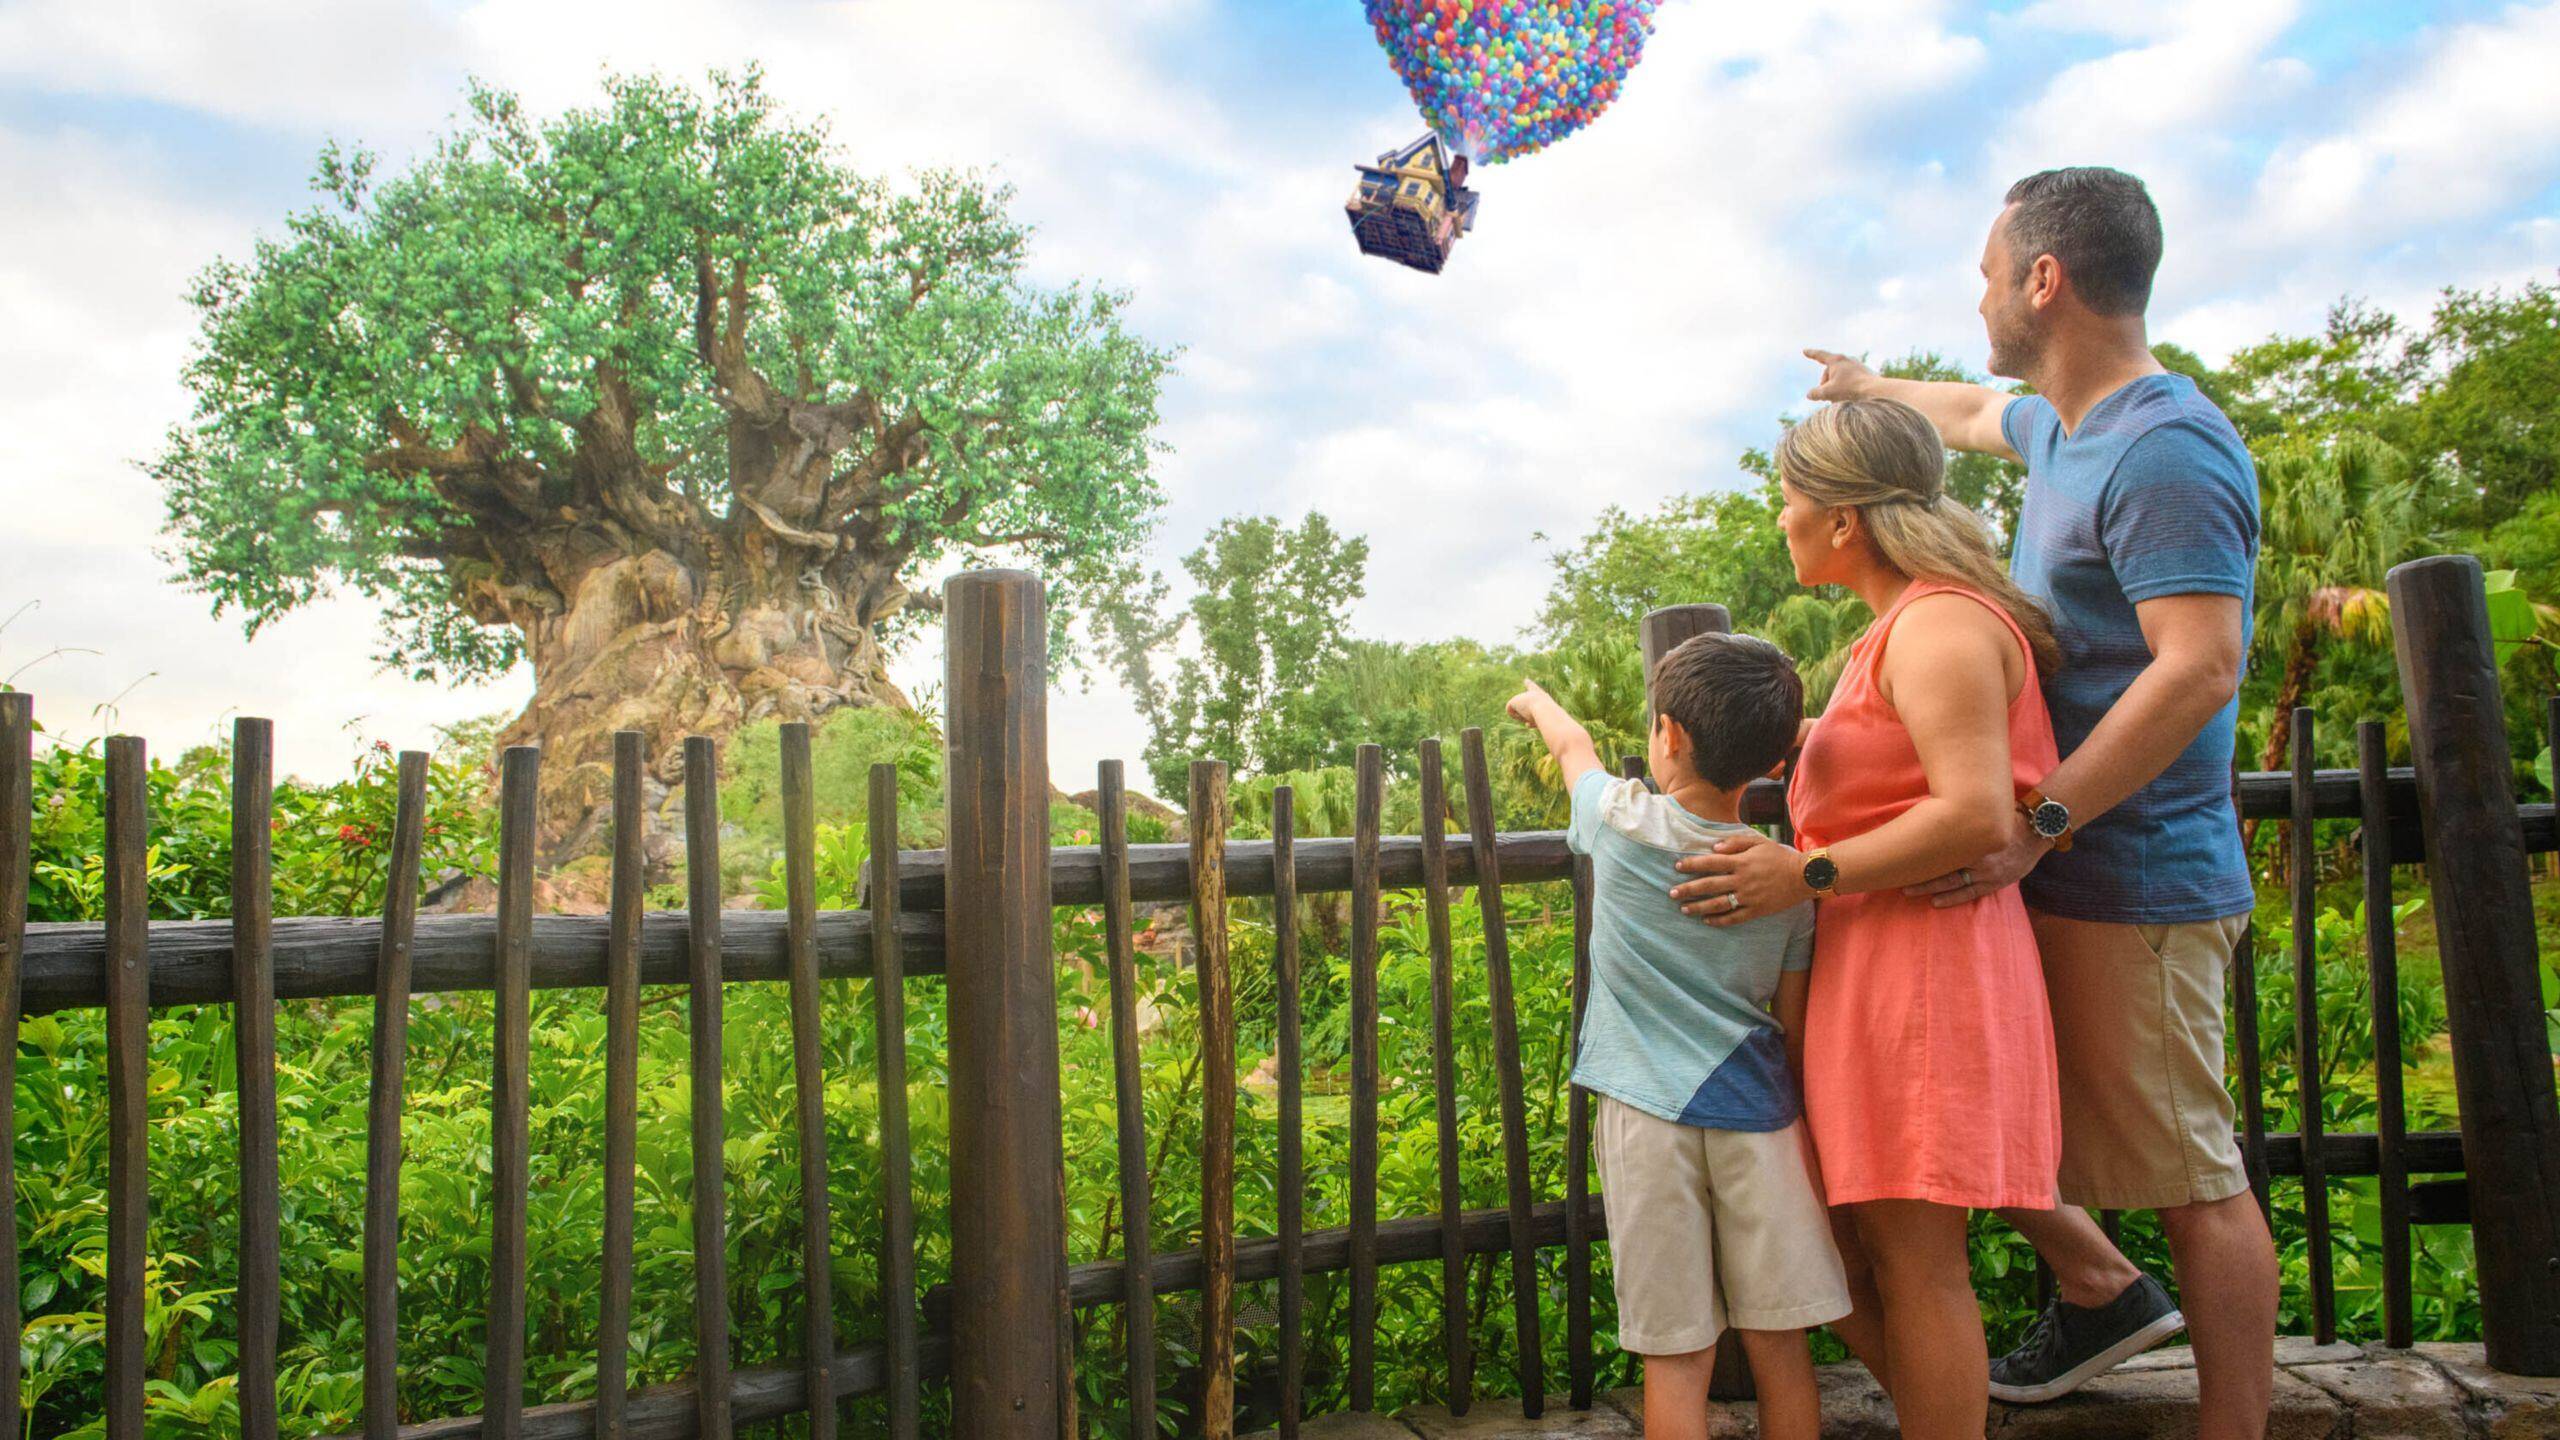 Disney PhotoPass magic shot inspired by the Disney and Pixar film, Up